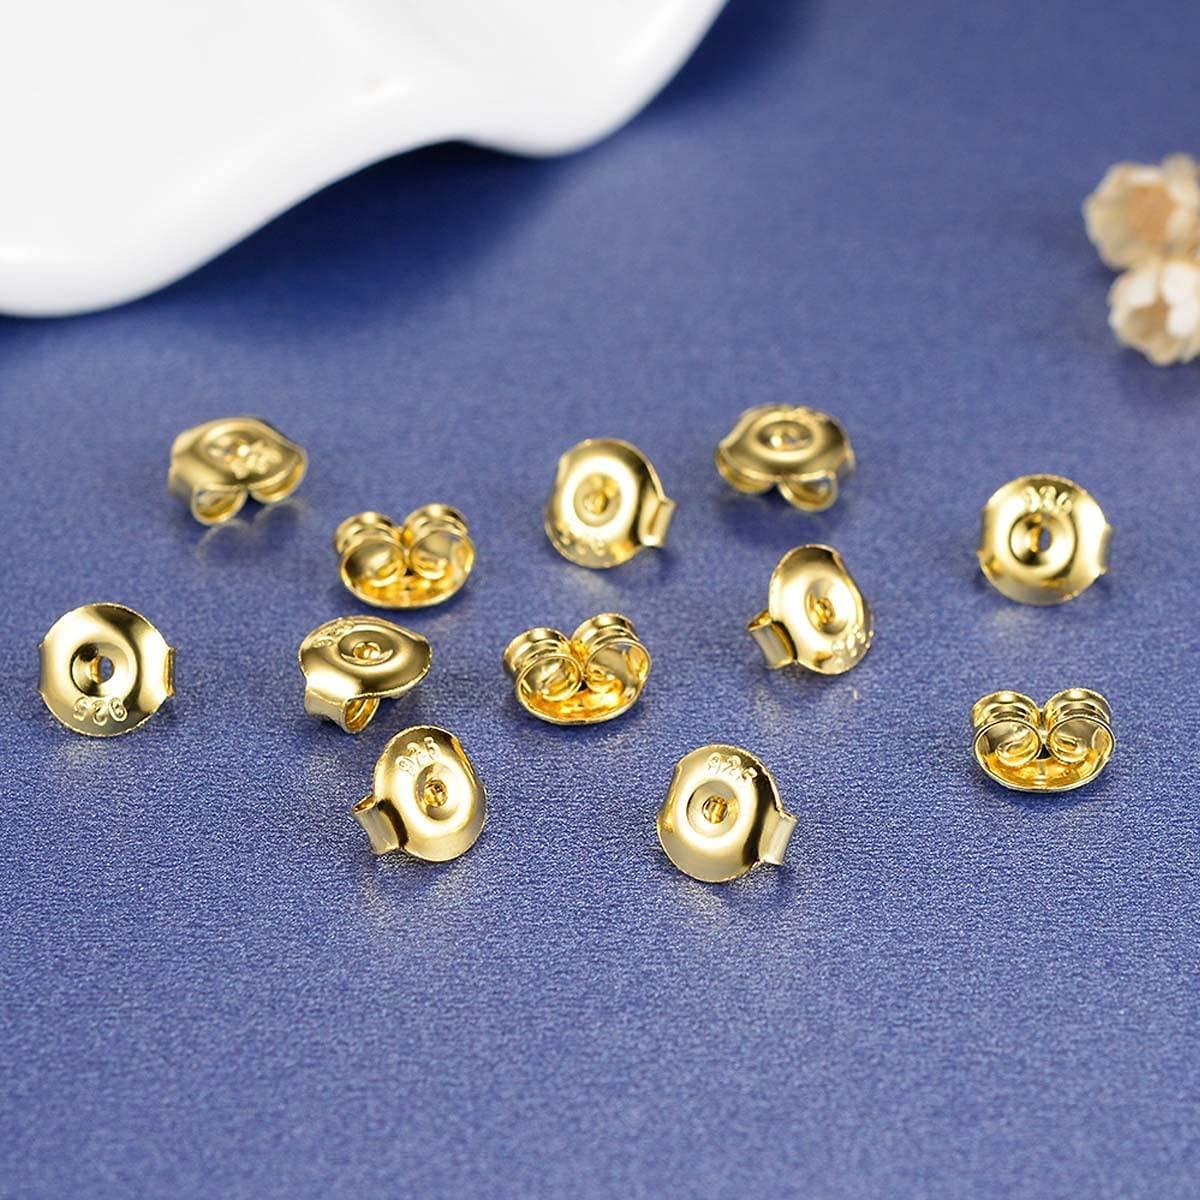 3 Pairs Screw Earring Backs Replacements,14K Gold Plated 925 Silver Secure  Locking Hypoallergenic Screw On Earring Backs for Studs,Screw Backs Fit for